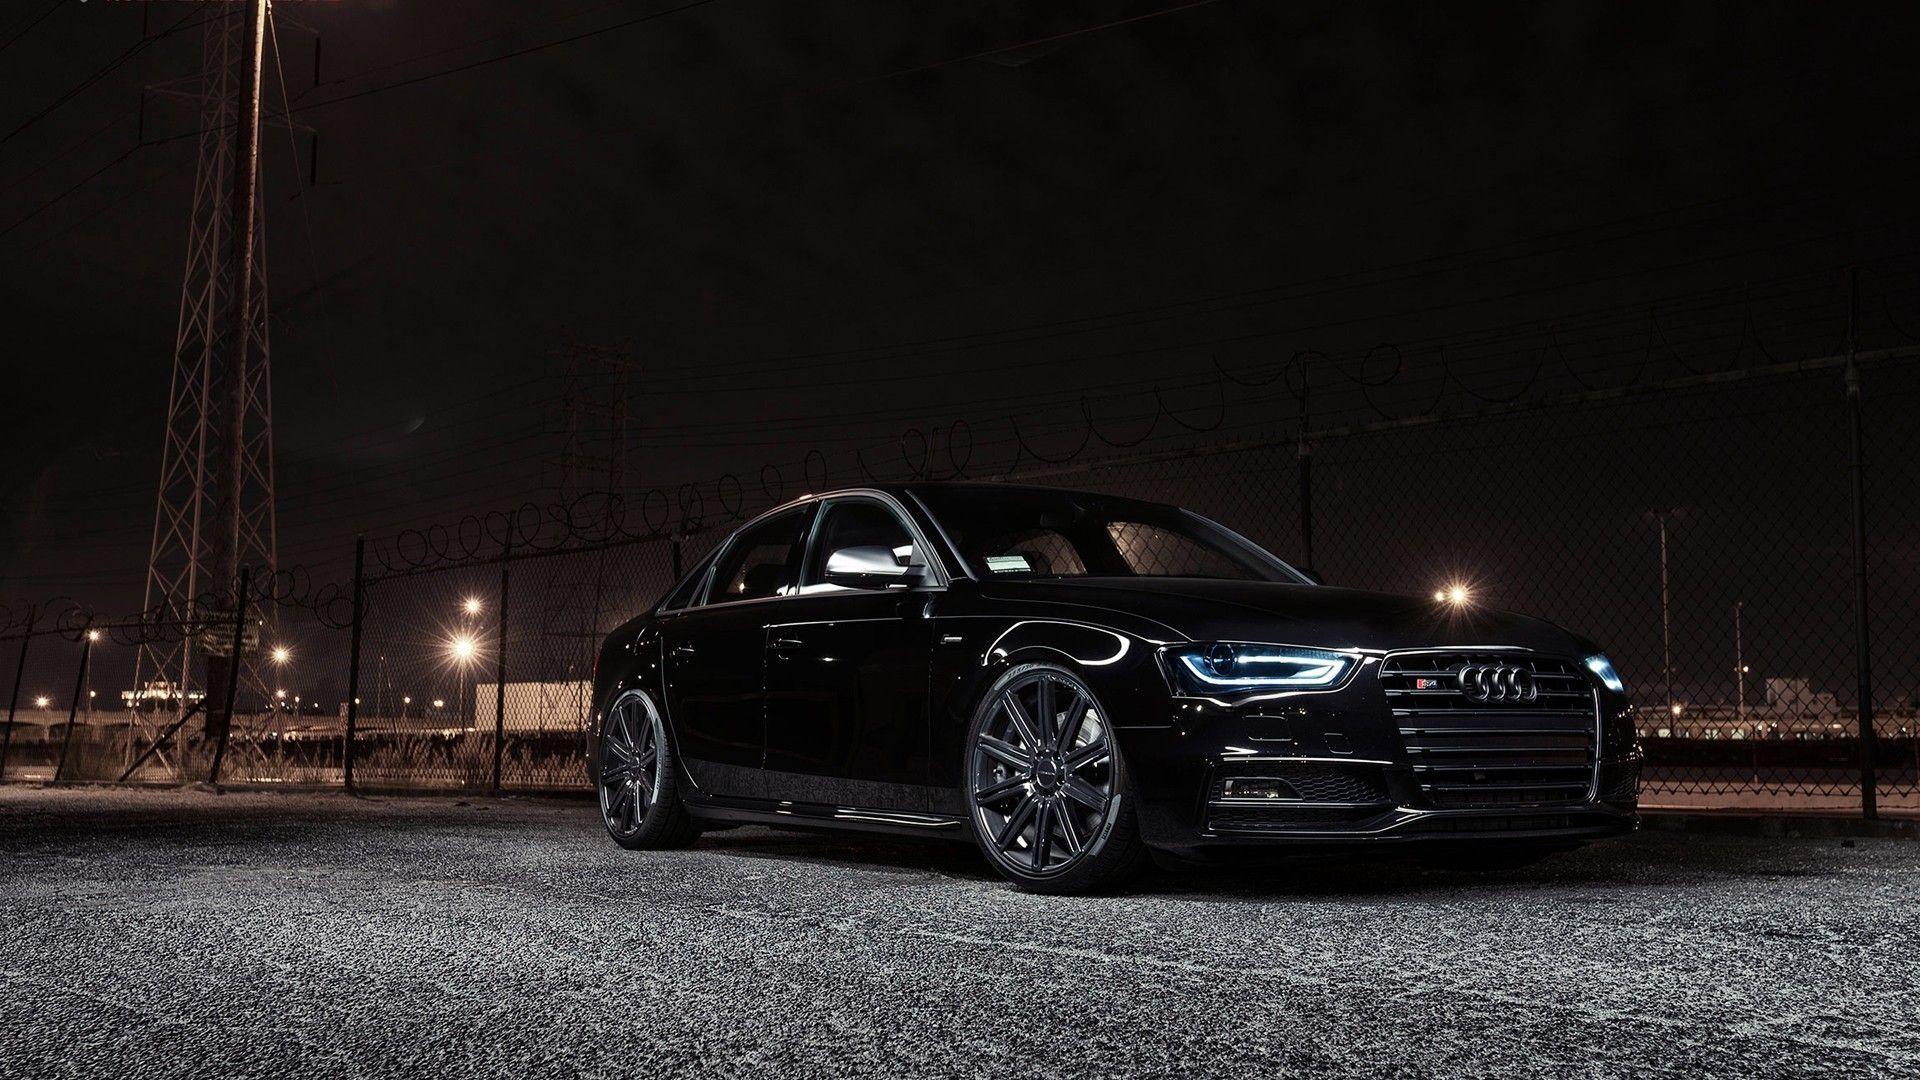 Audi Wallpaper, 4K Ultra HD Picture for desktop and mobile